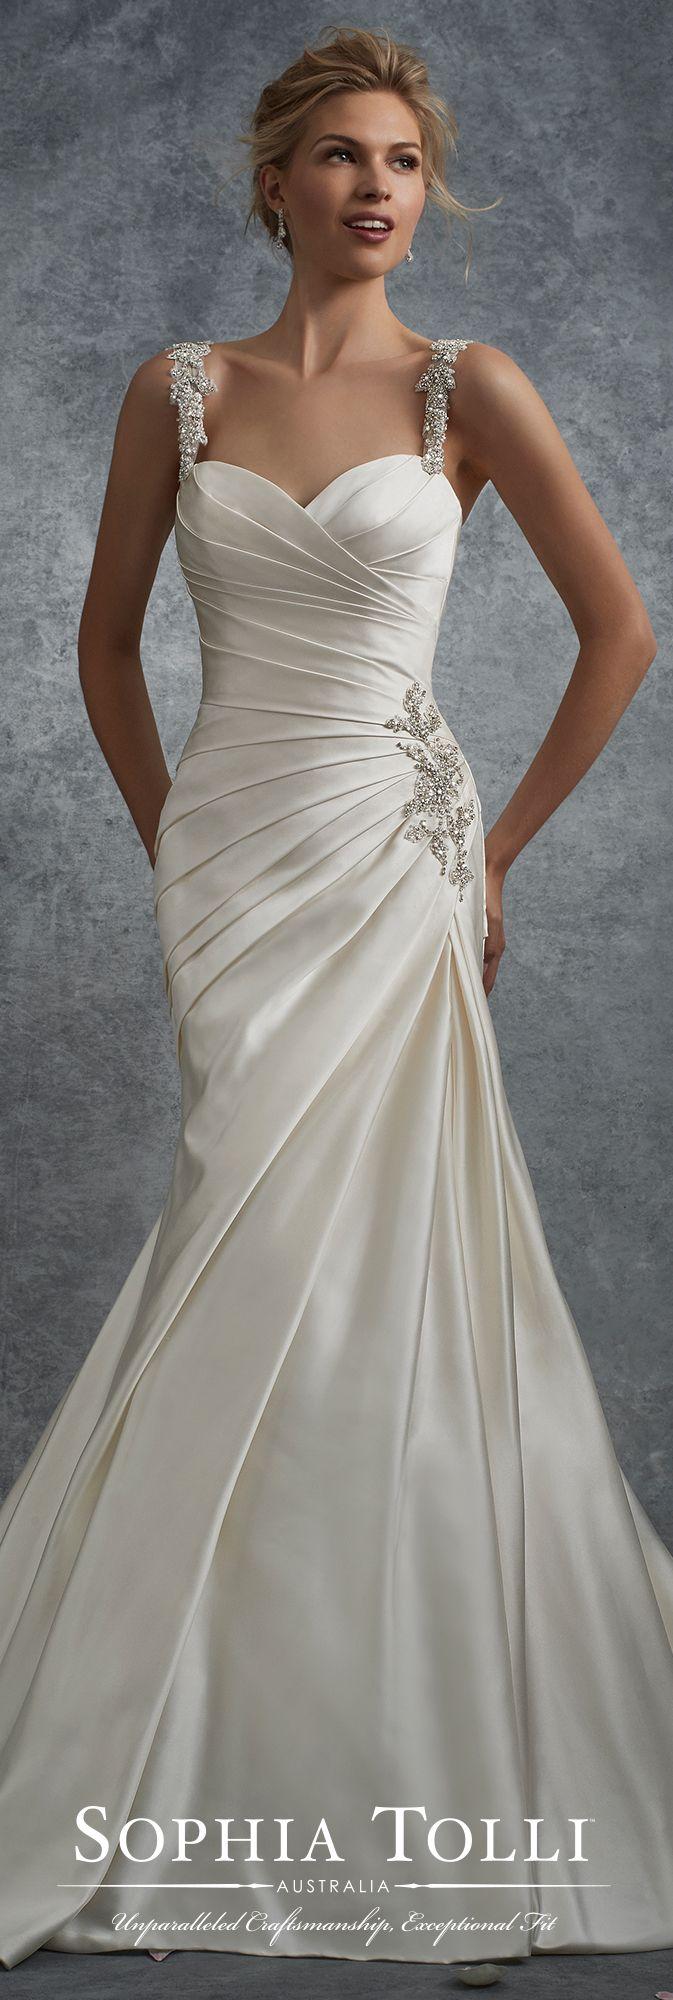 Wedding - Satin Fit And Flare Wedding Dress With Beaded Straps - Sophia Tolli Y21738